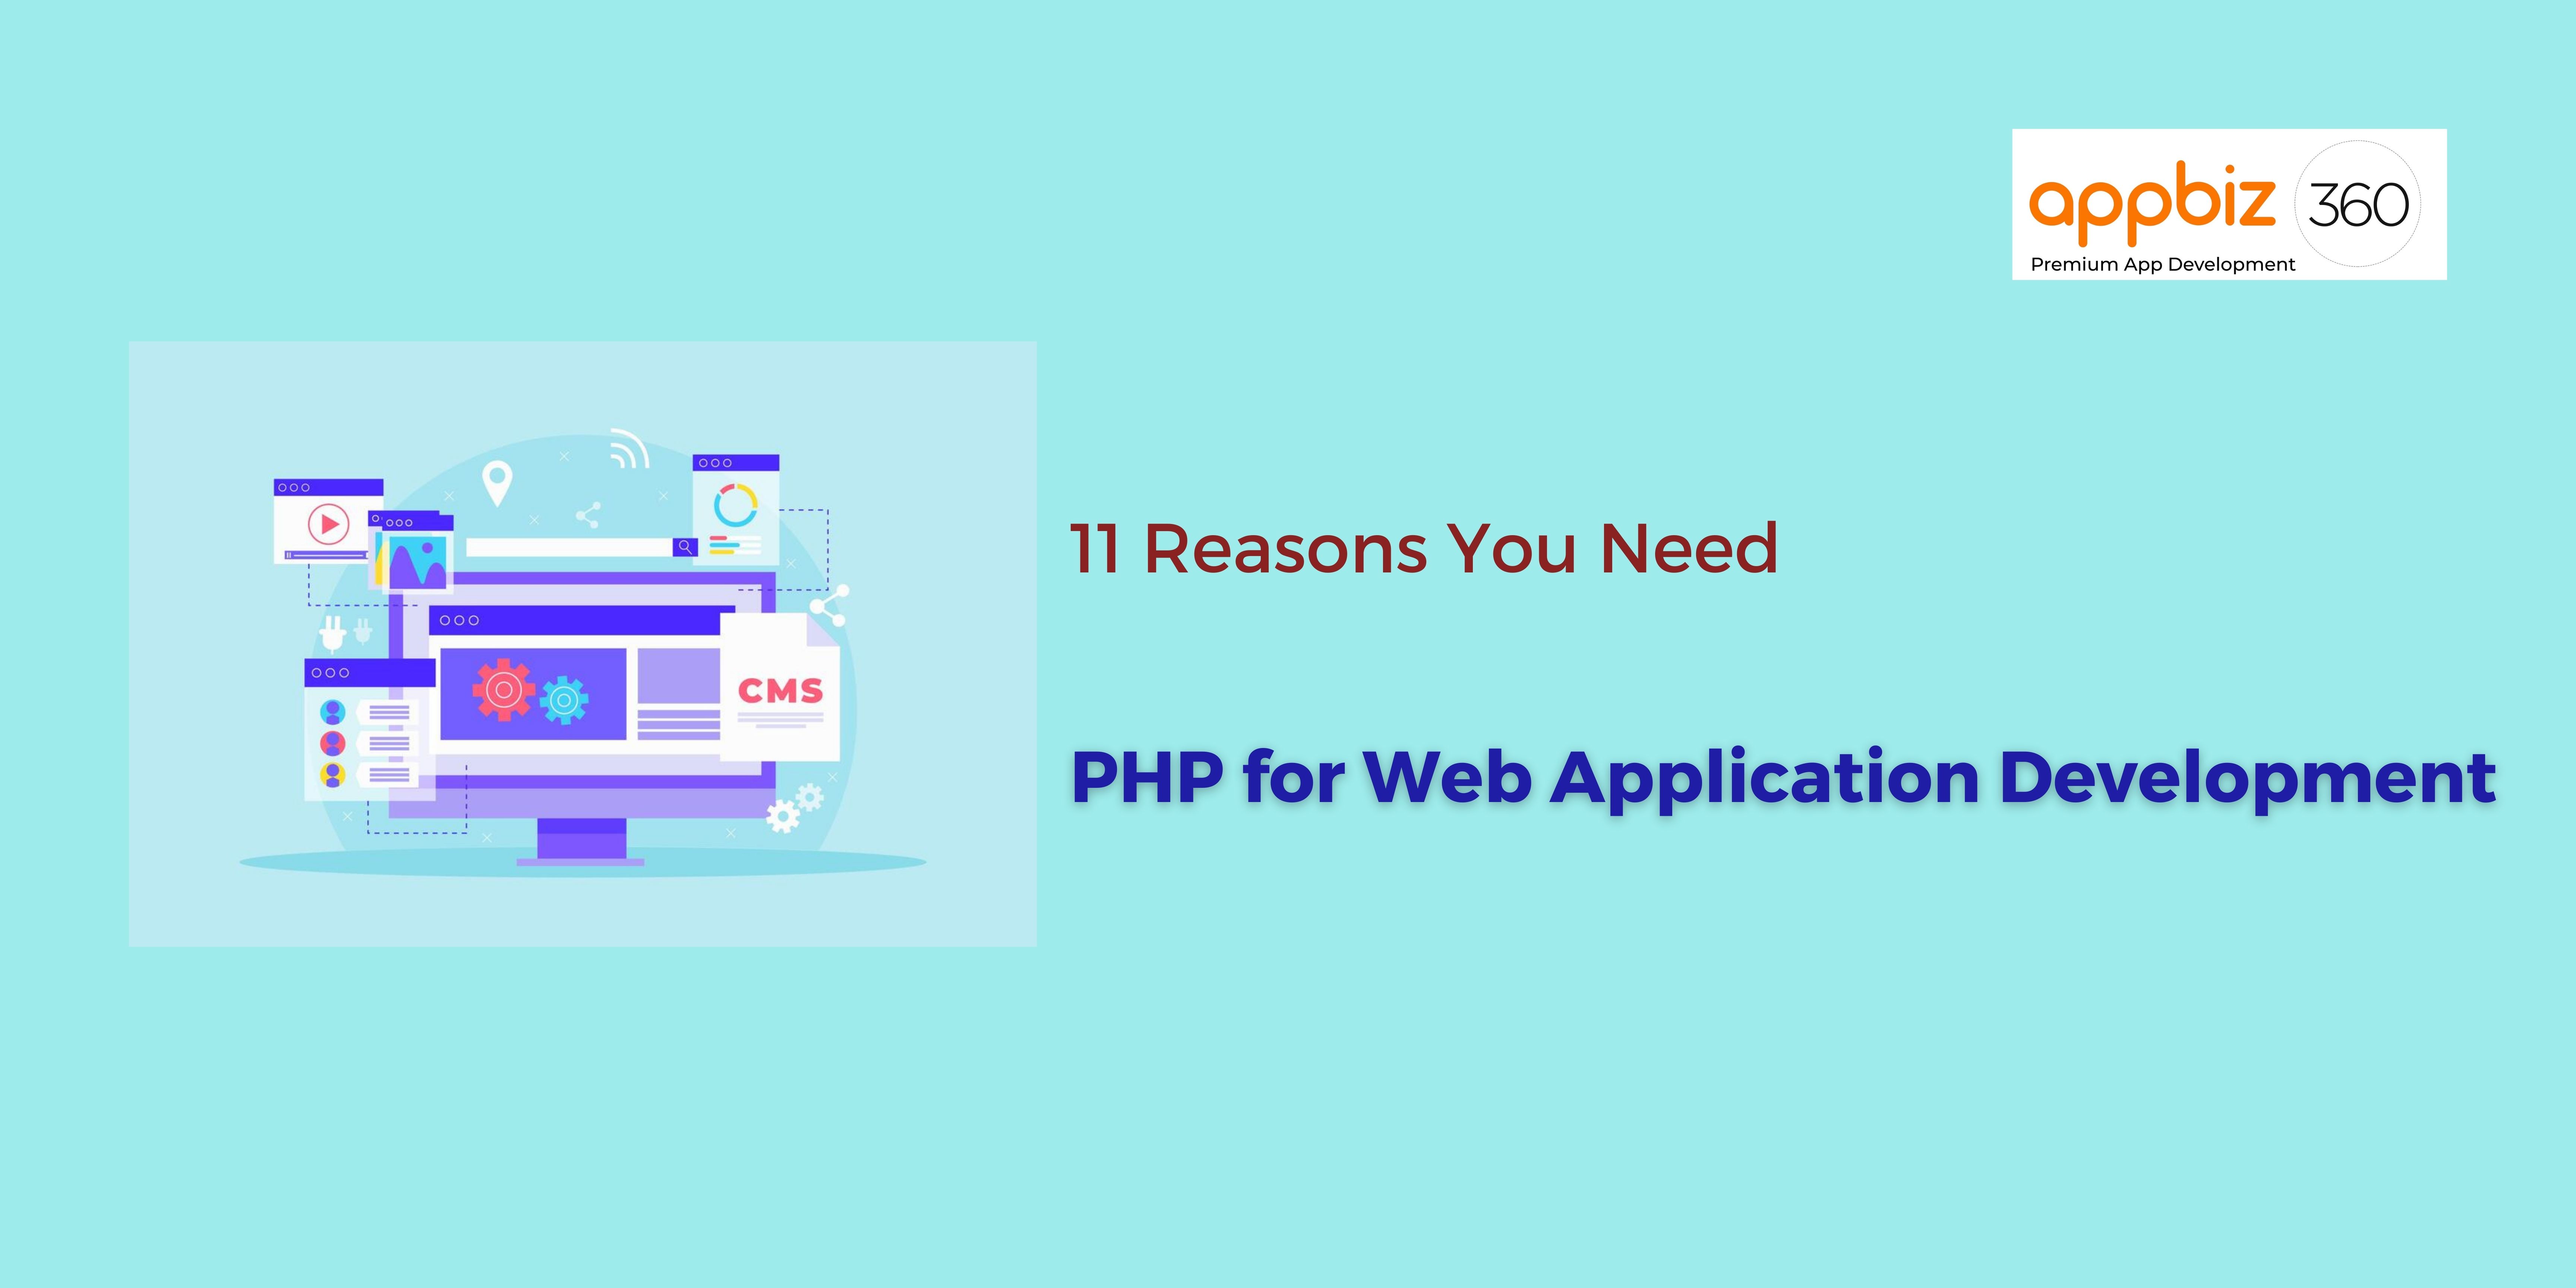 11 Reasons You Need PHP for Web Application Development